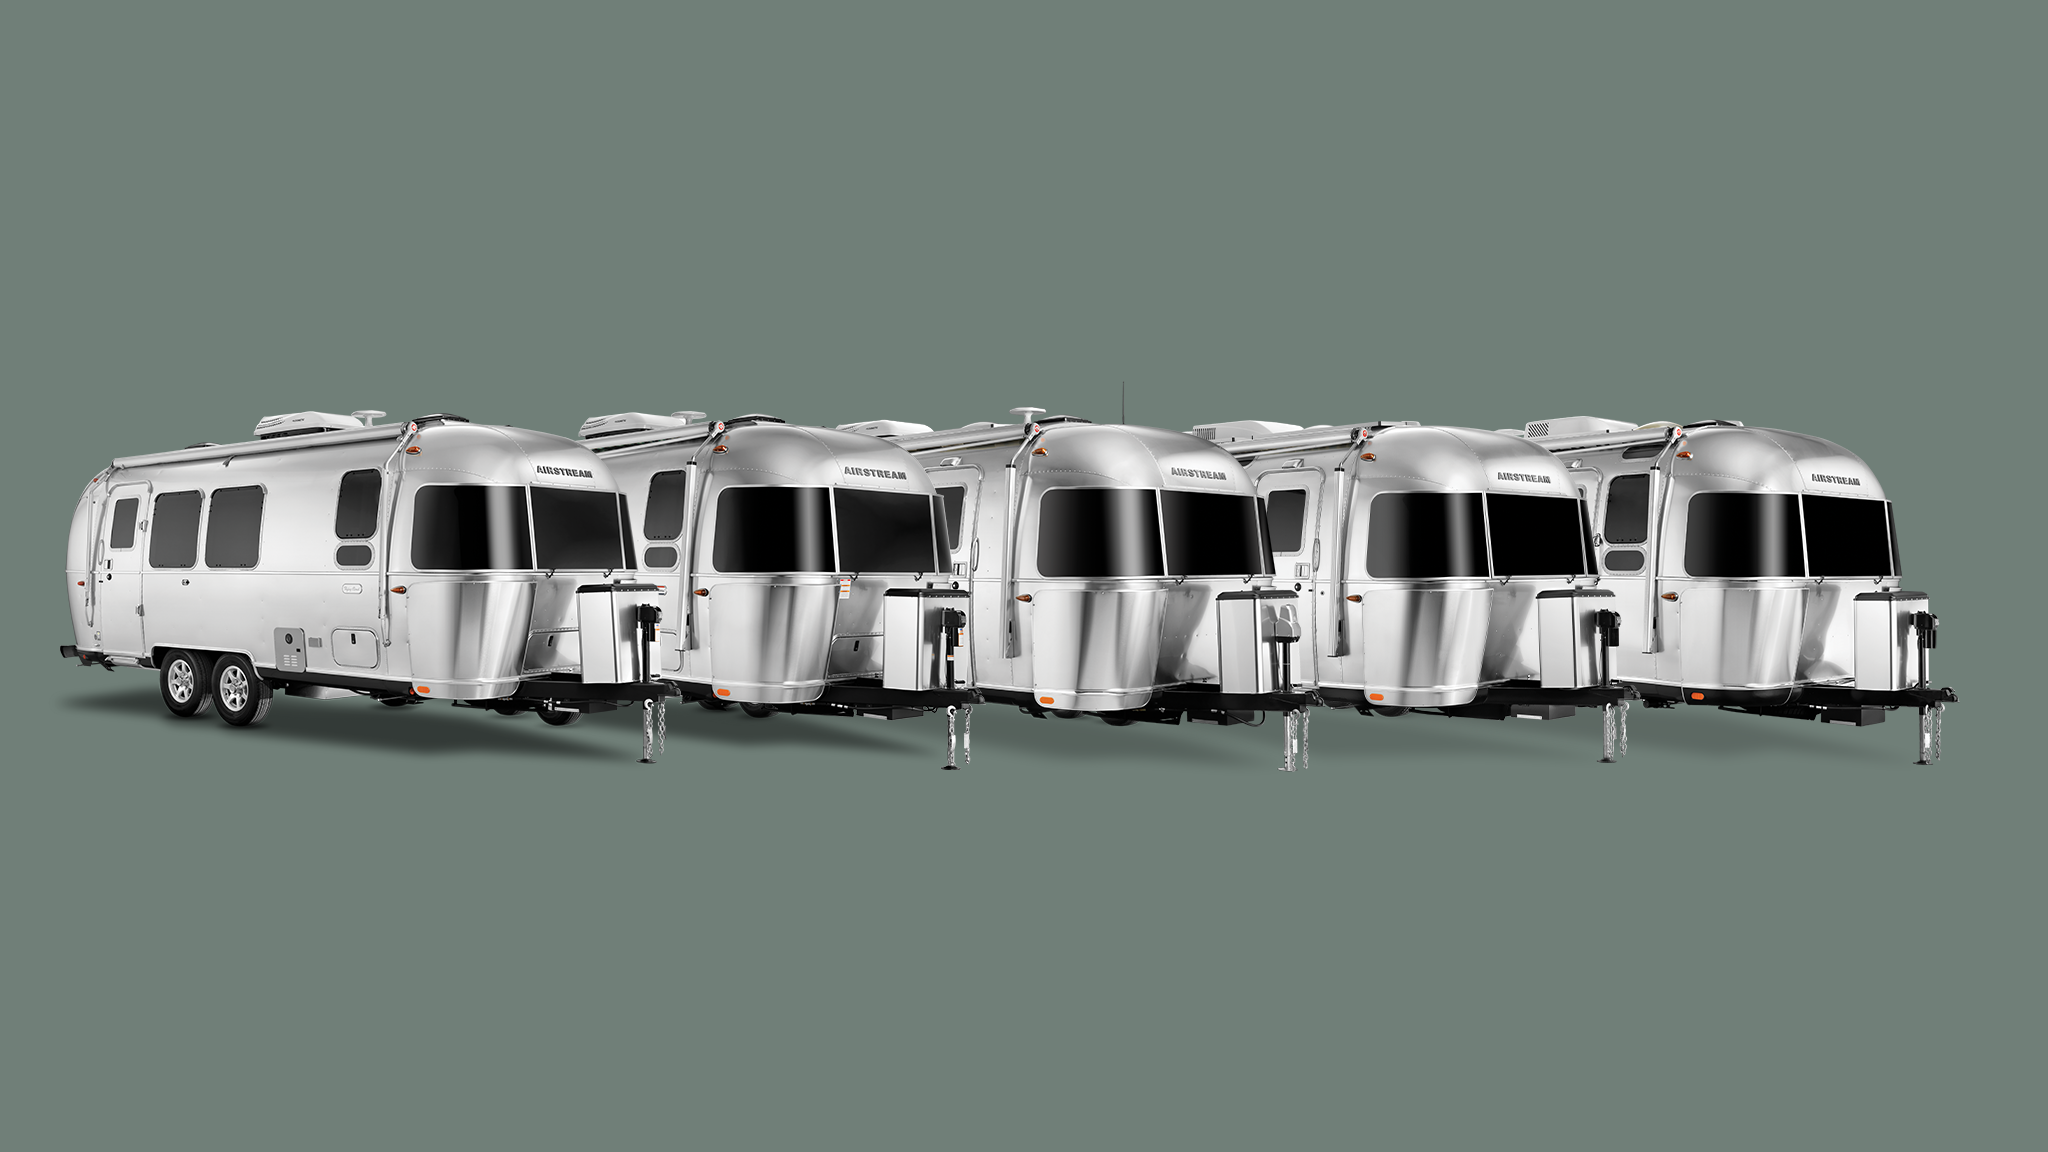 All of Airstream's dual axle travel trailers lined up in a line on a green background.